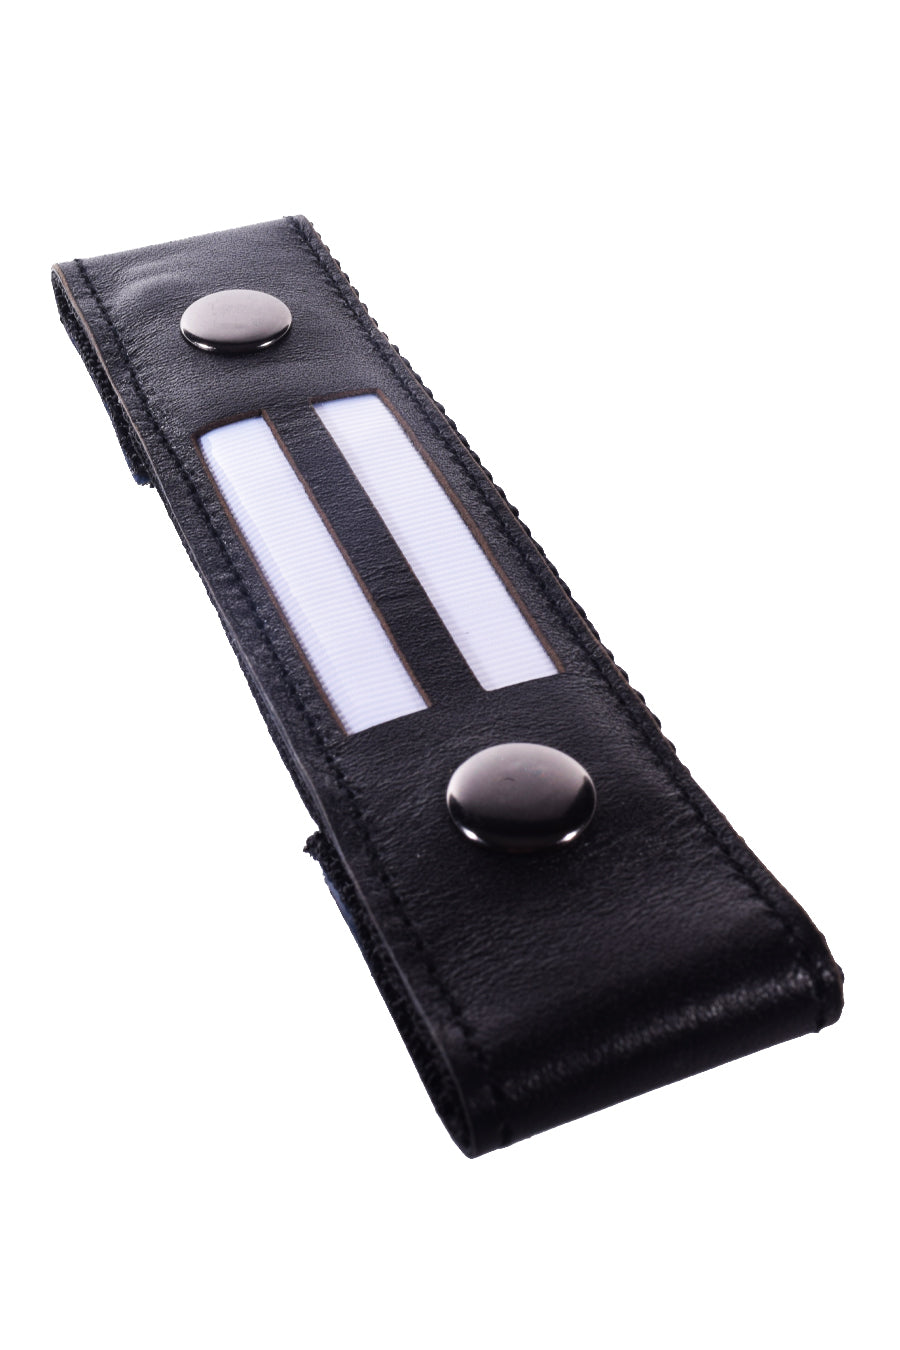 GLOW CENTER STRAP- EQUALITY - DealByEthan.gay